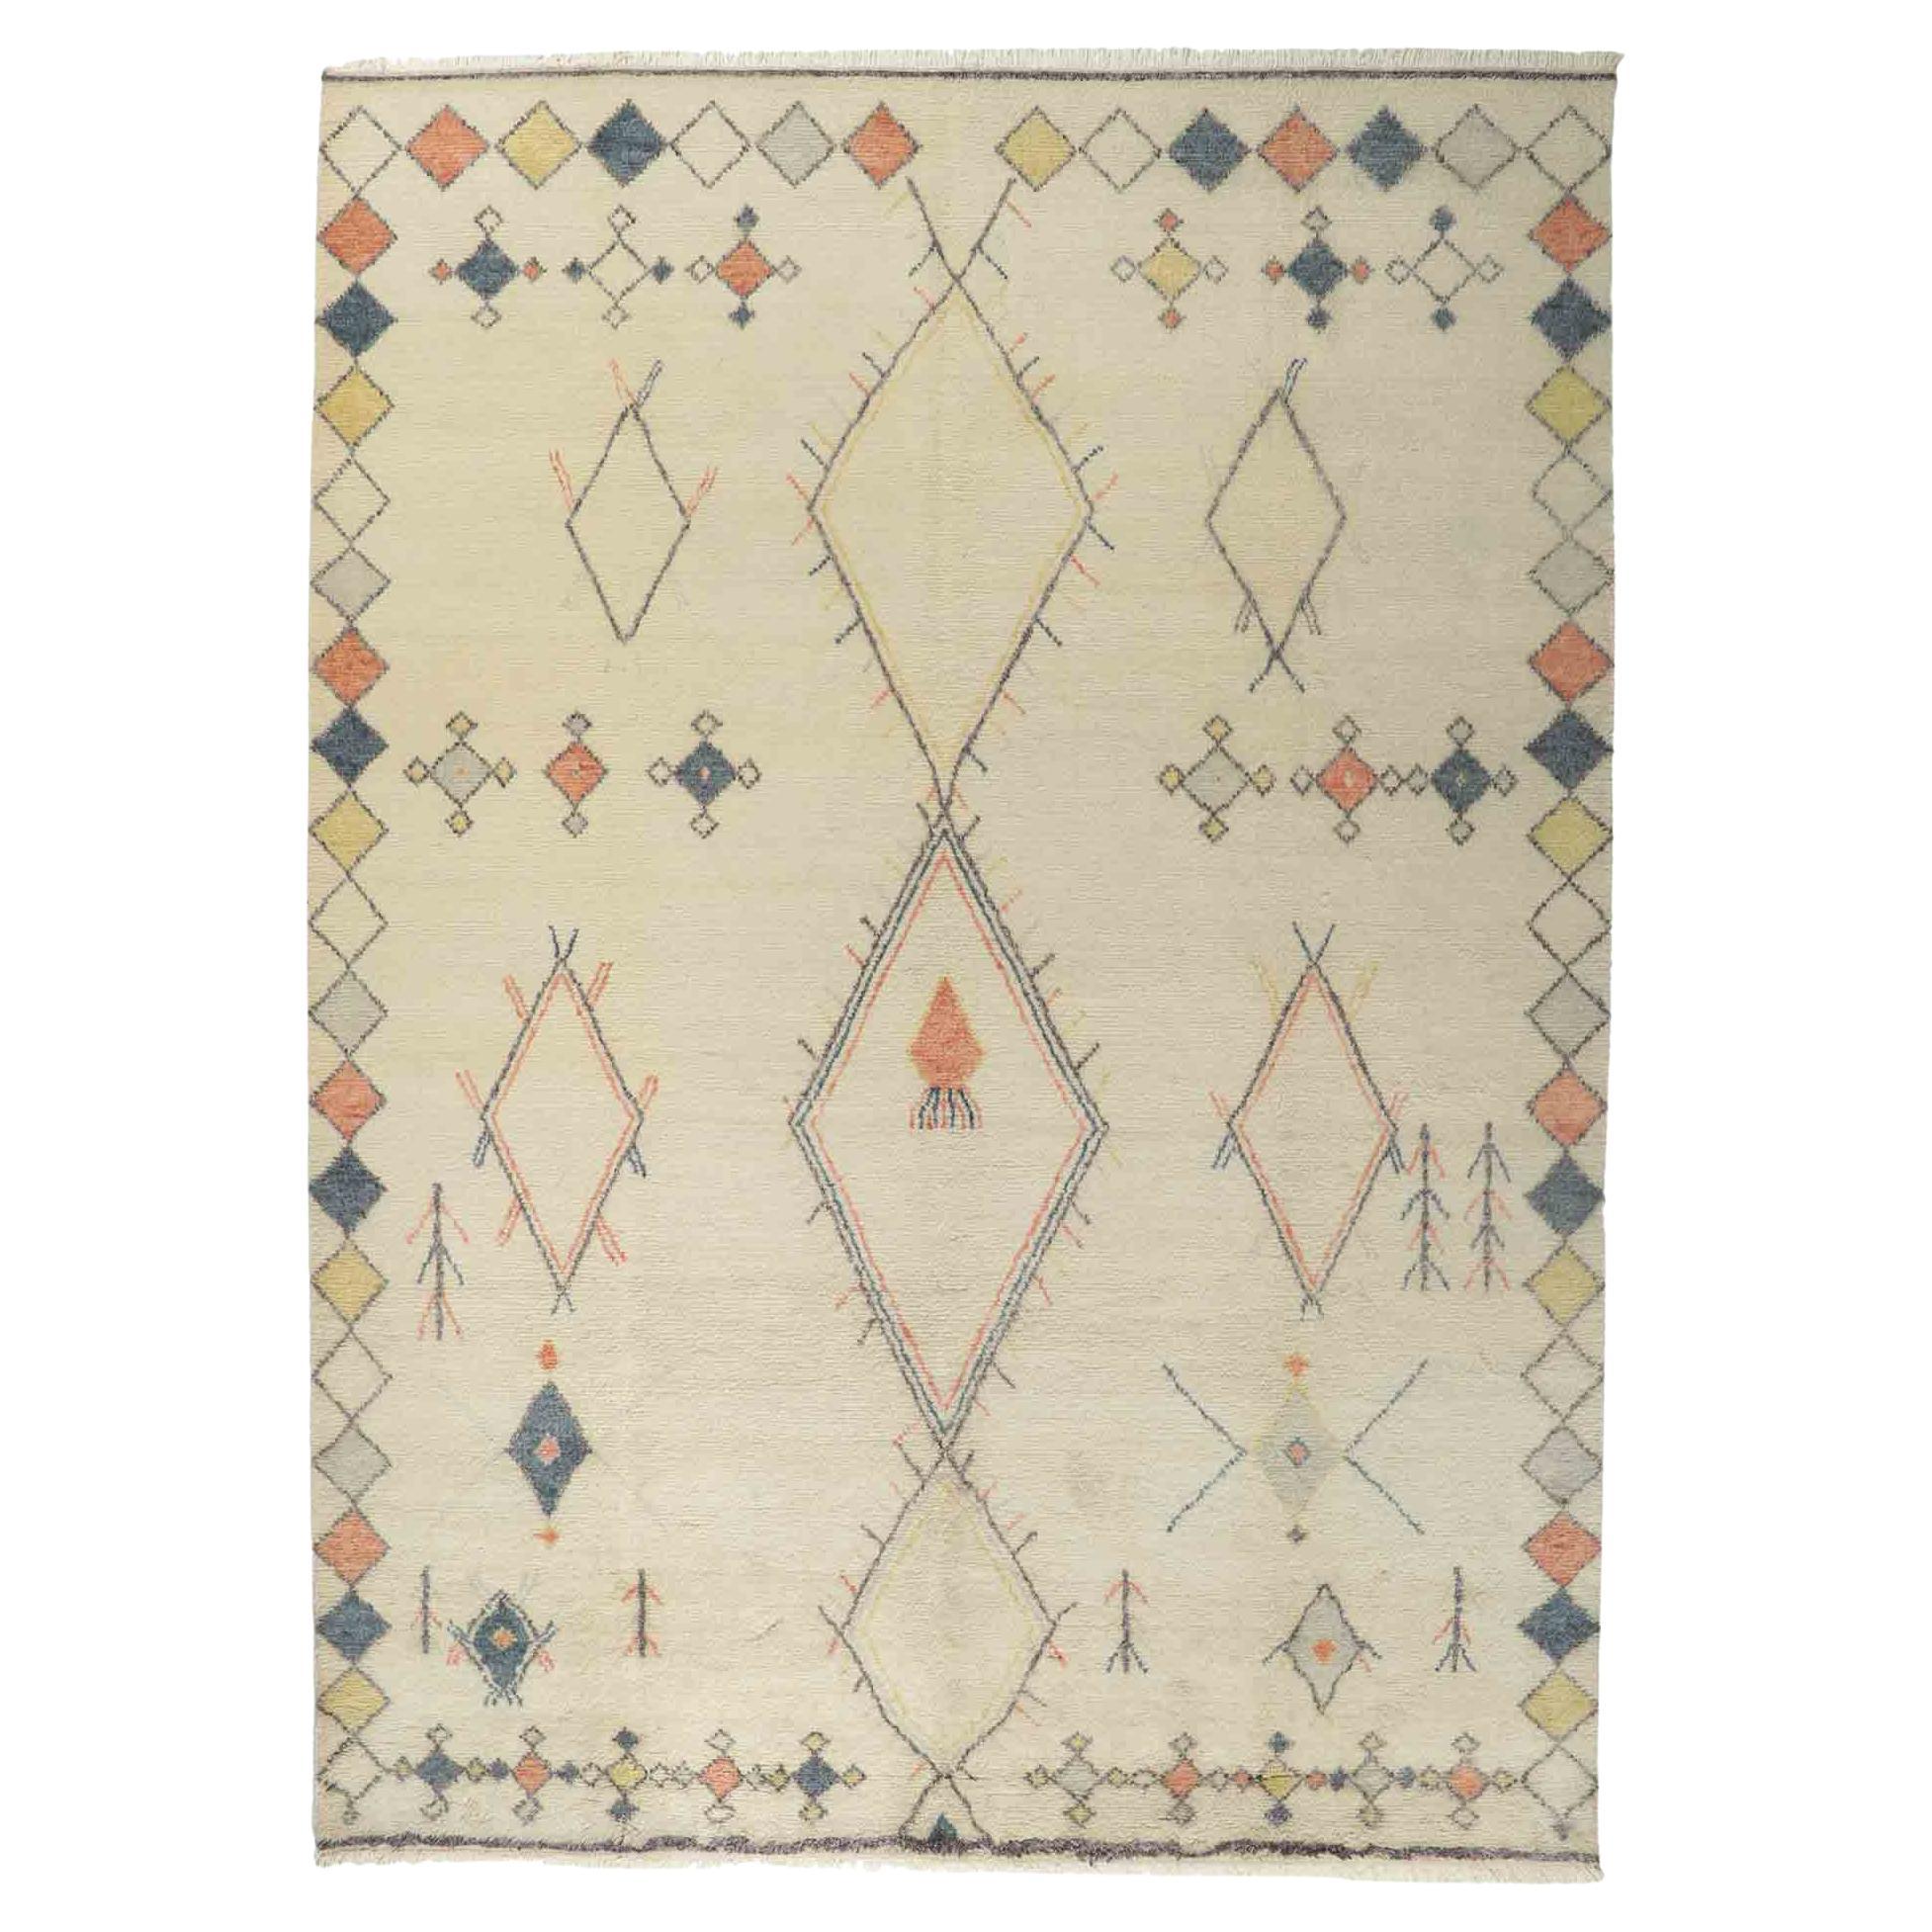 New Contemporary Moroccan Style Area Rug